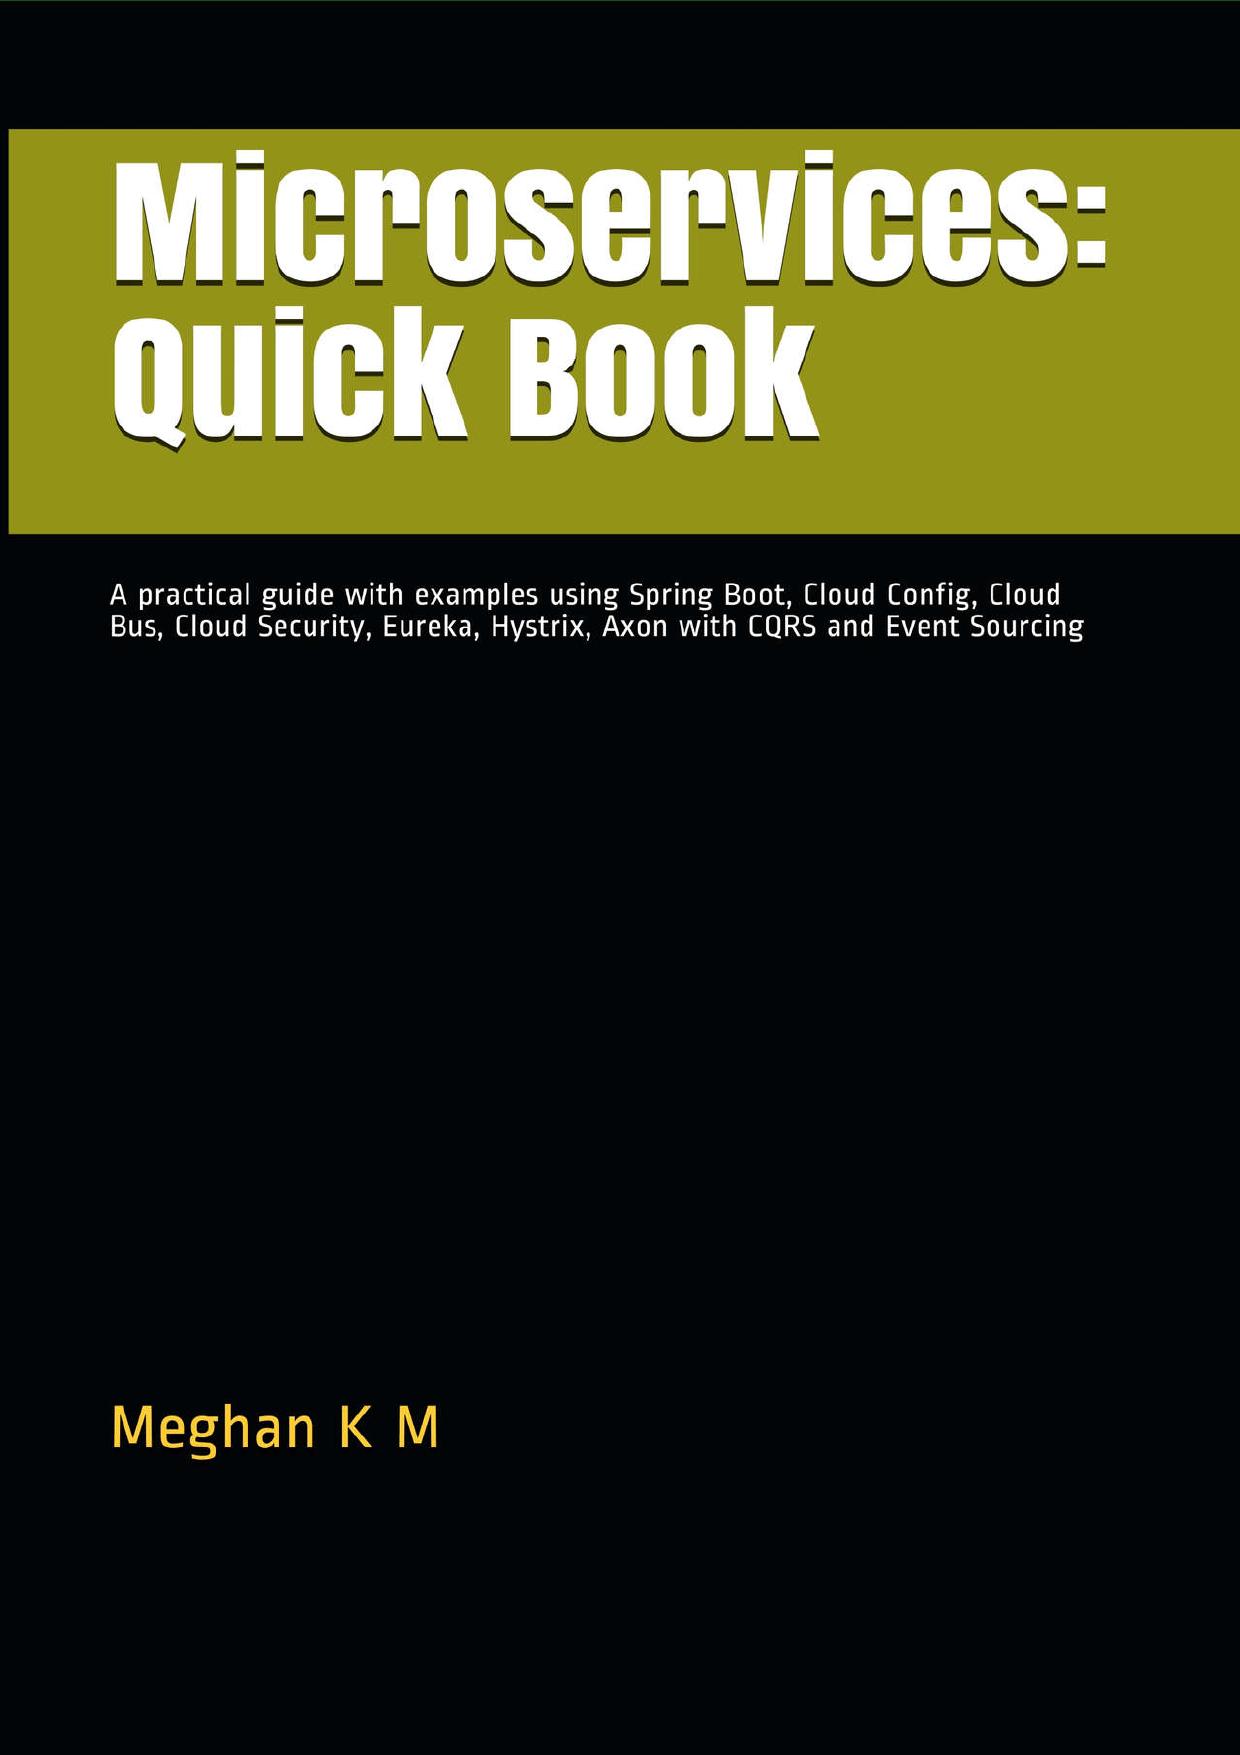 Microservices: Quick Book: A practical guide with examples using Spring Boot, Cloud Config, Cloud Bus, Cloud Security, Eureka, Hystrix, Axon with CQRS and Event Sourcing by Meghan K M